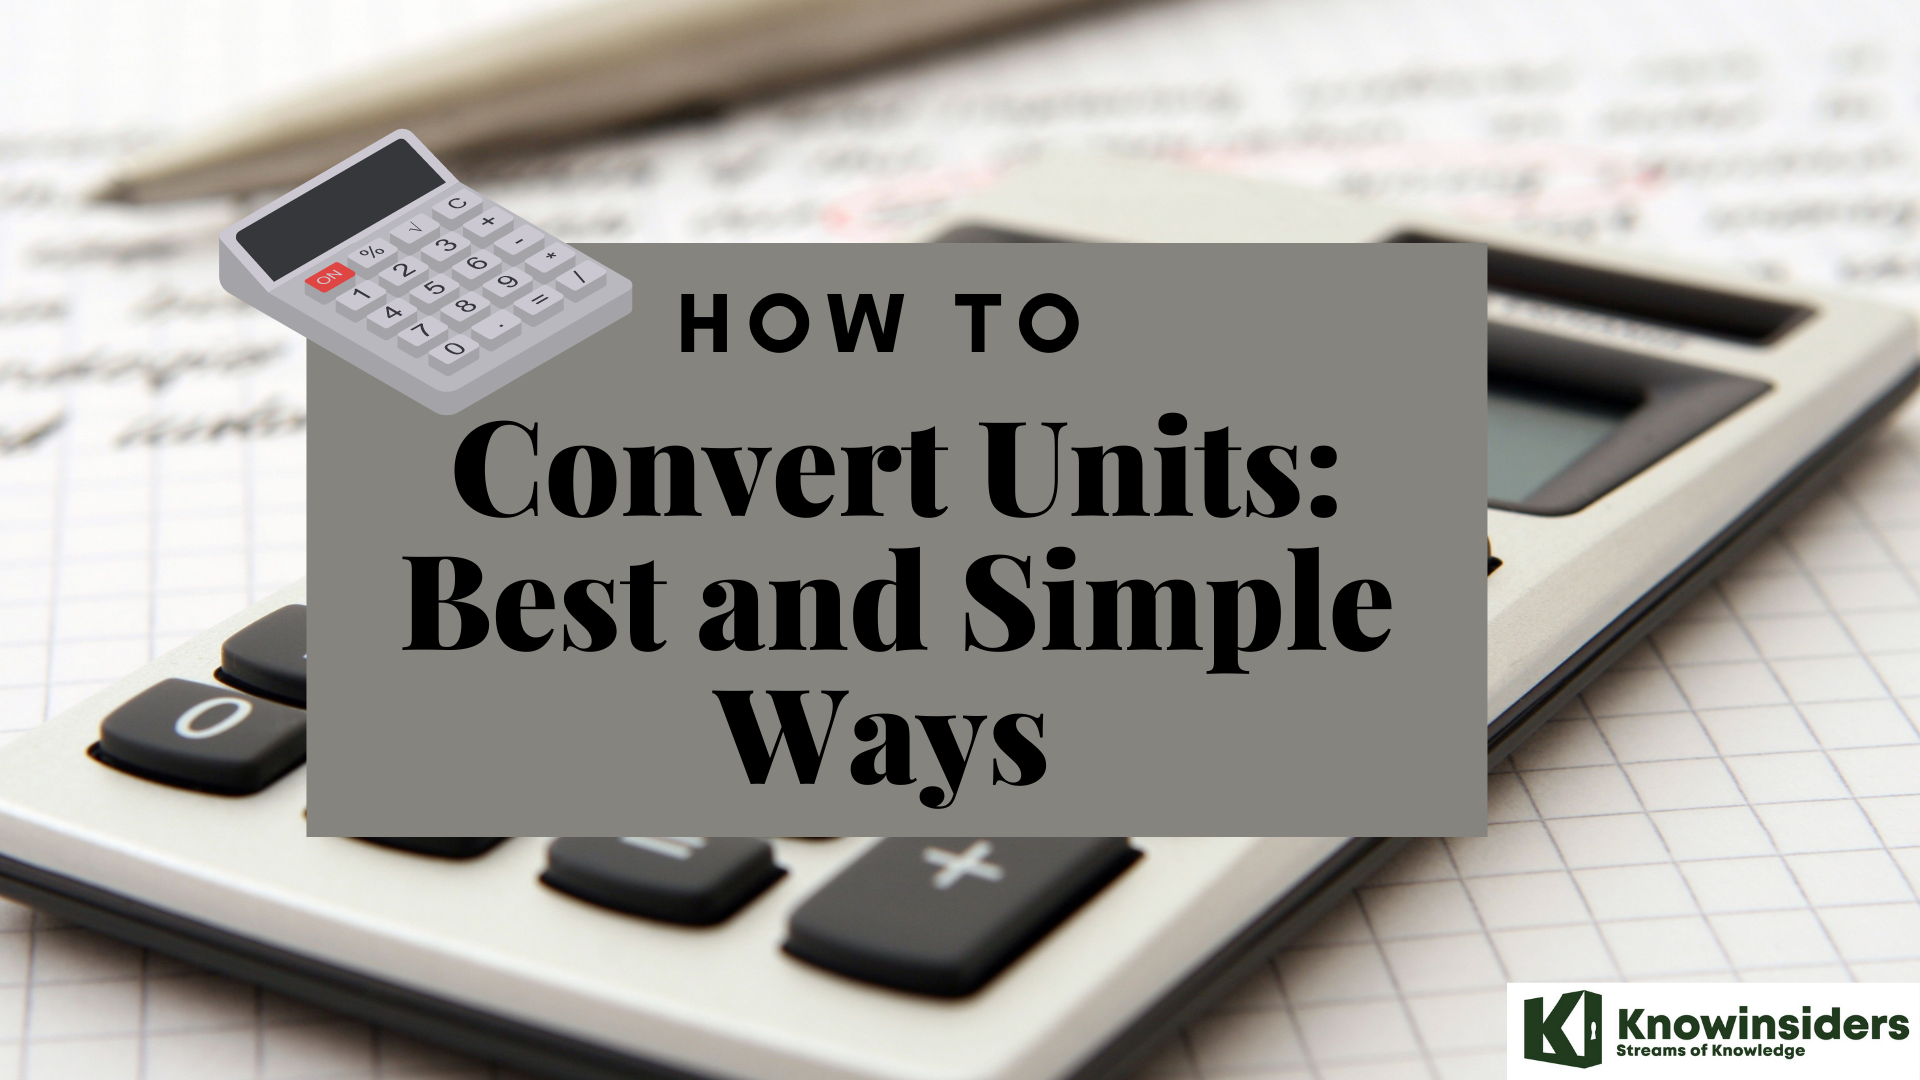 How To Convert and Calculate Units: Top Simple Ways